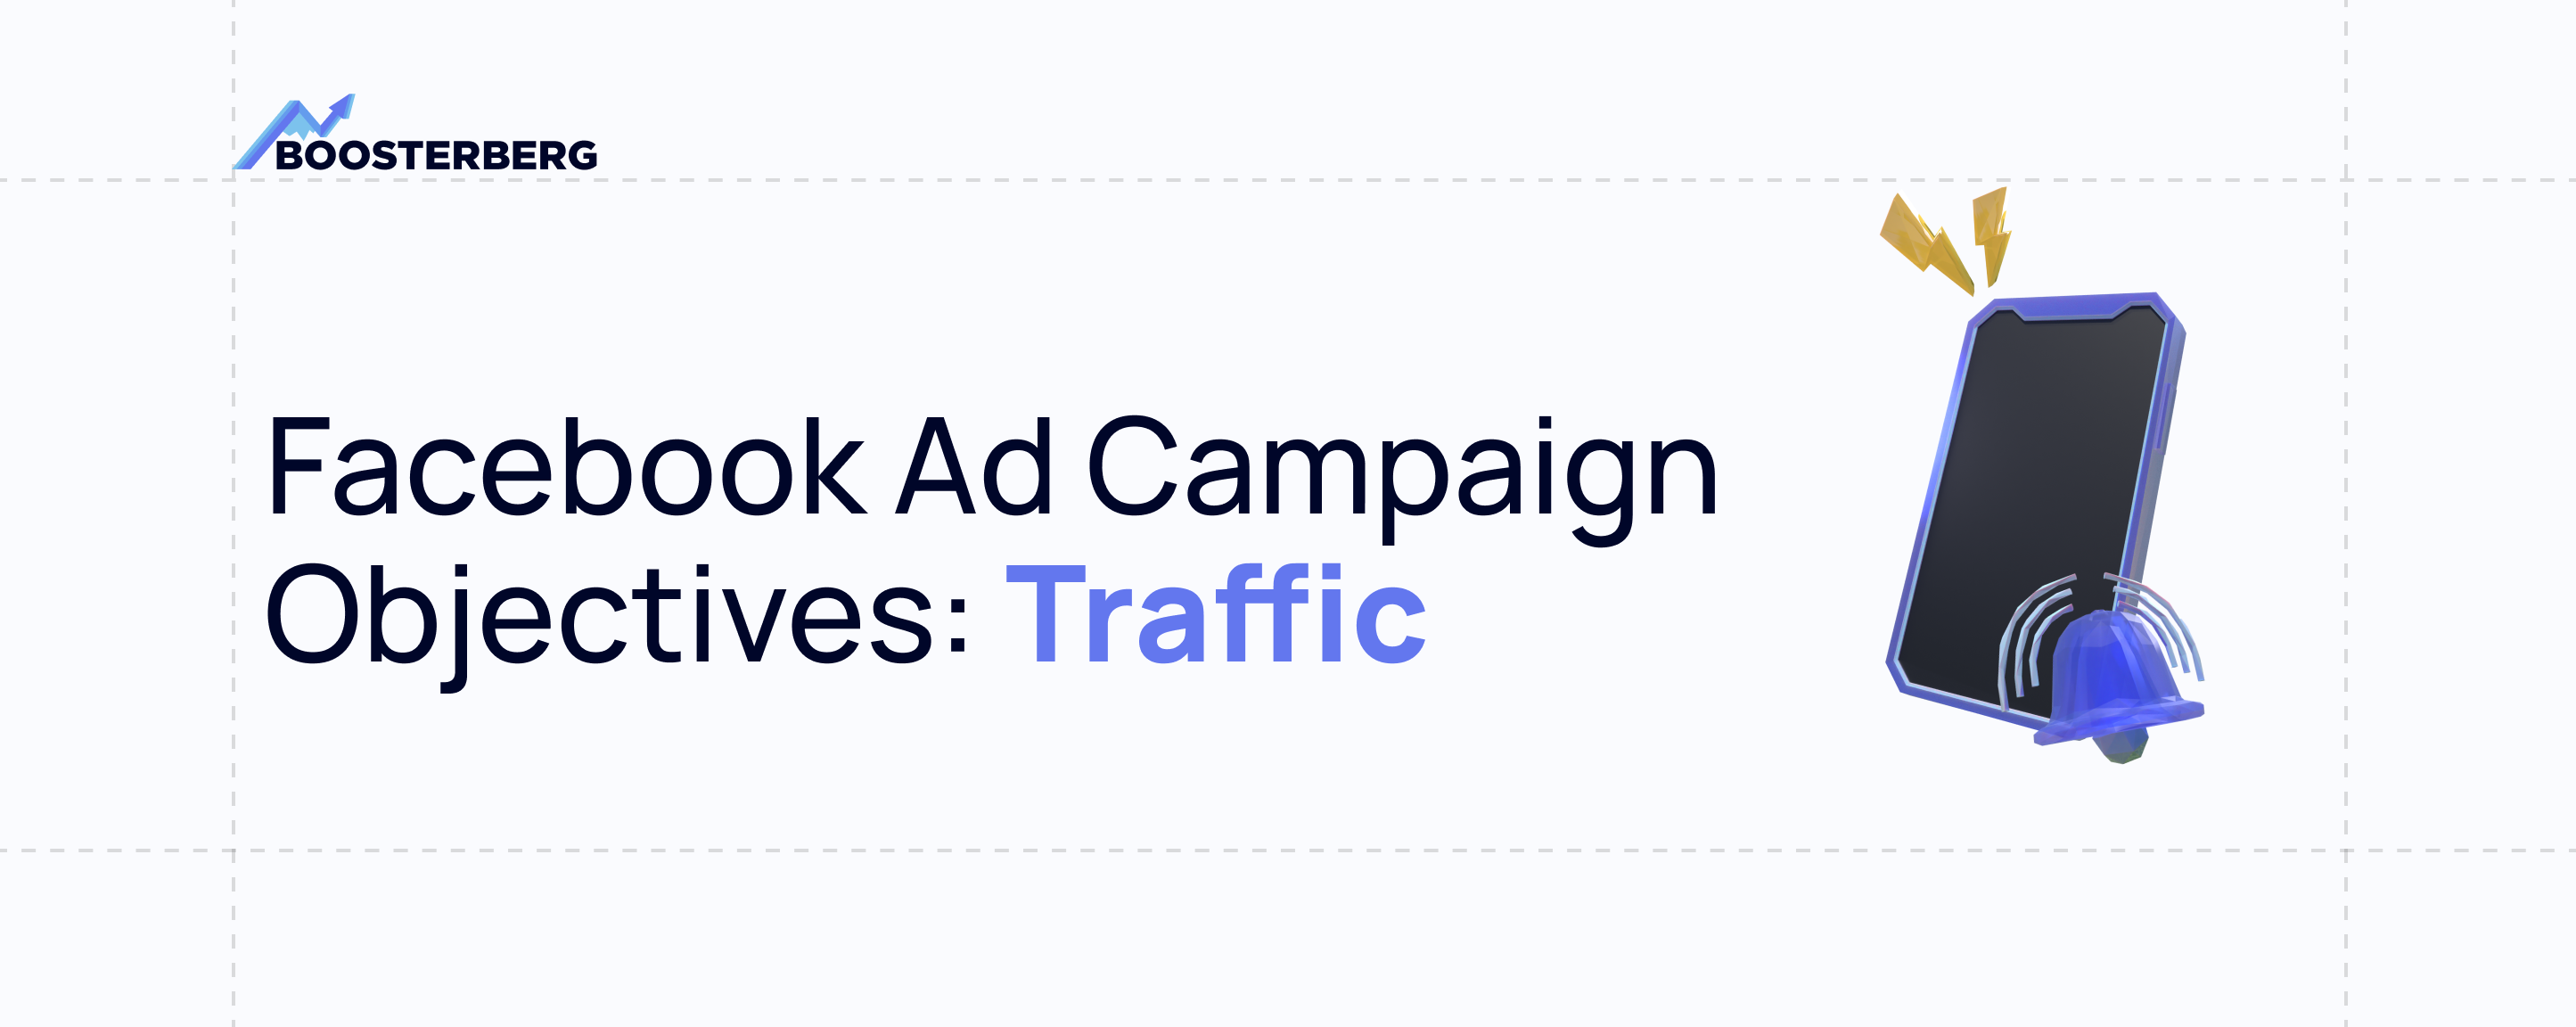 Facebook Ads: The Traffic Objective